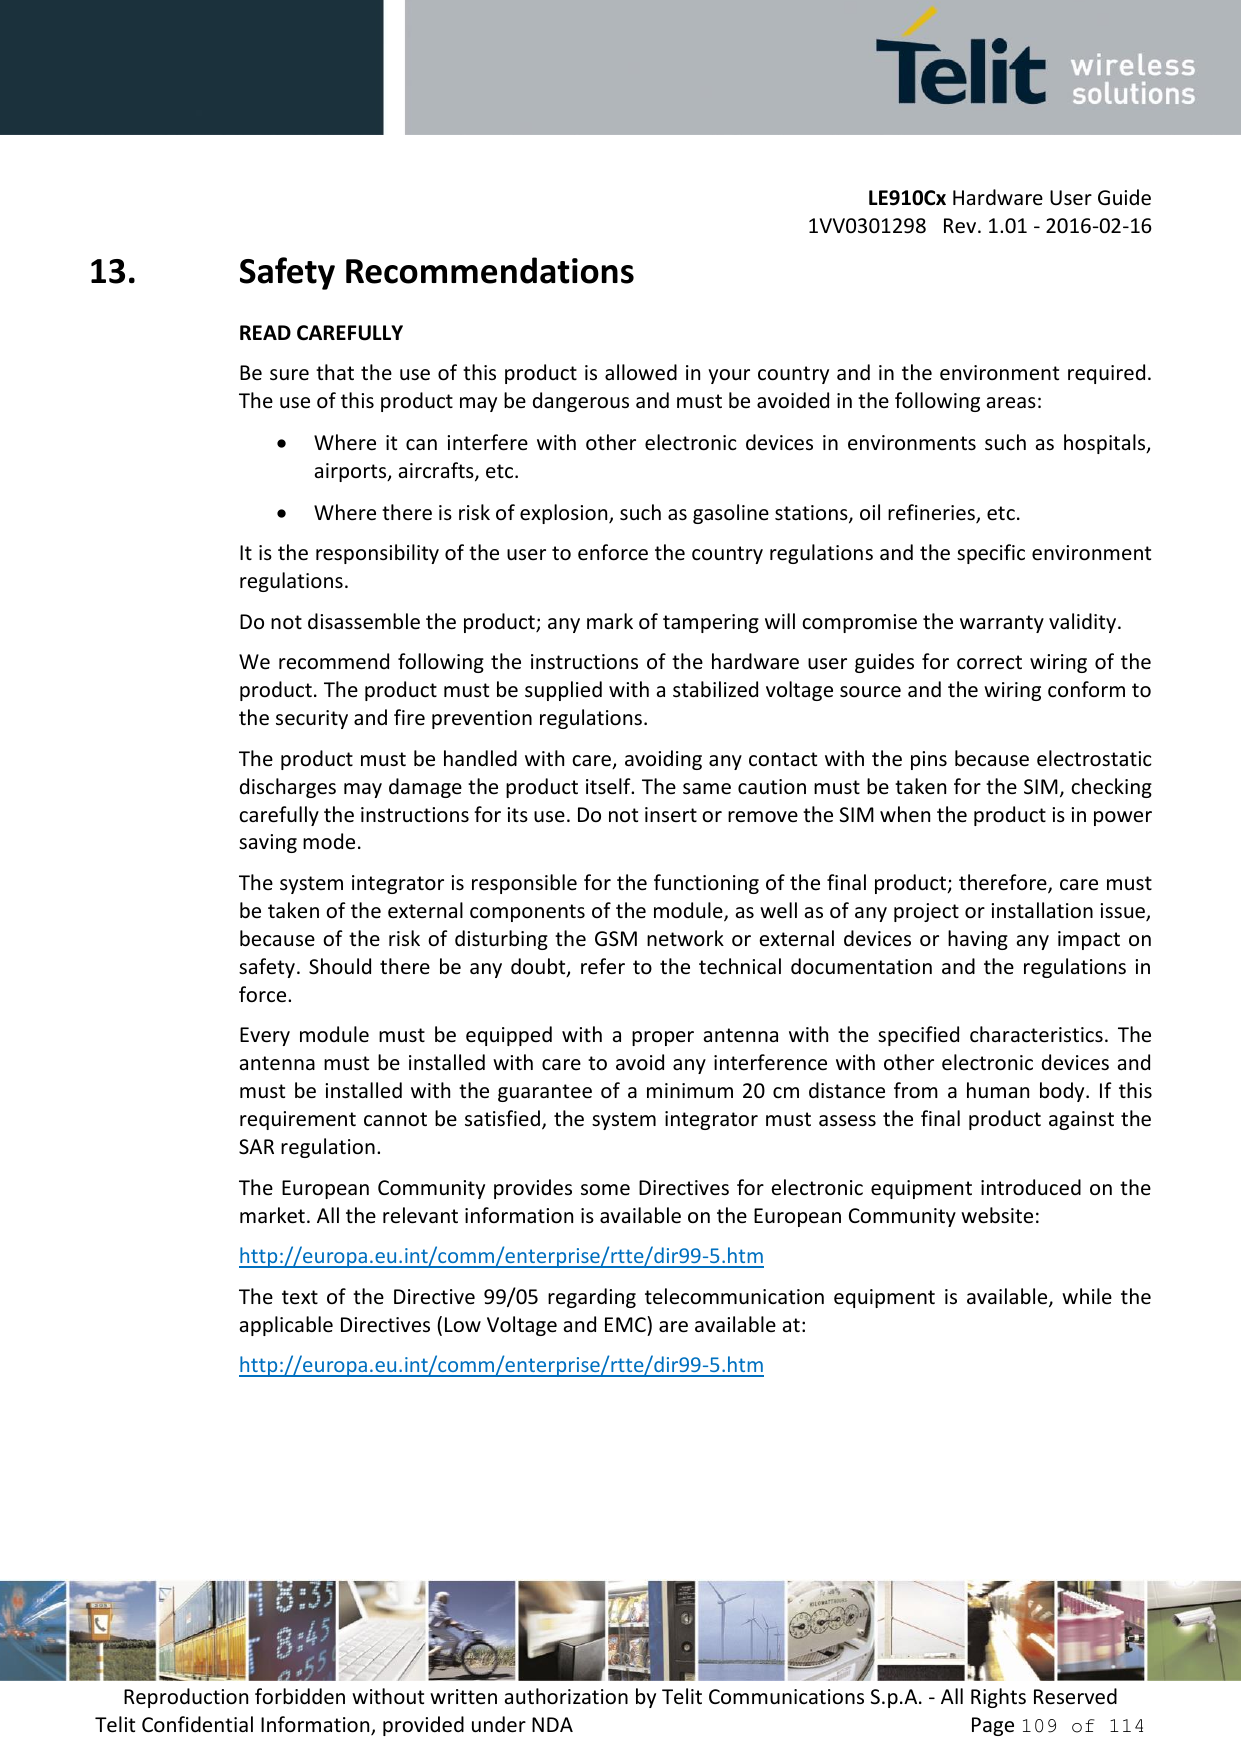 LE910Cx Hardware User Guide 1VV0301298   Rev. 1.01 - 2016-02-16 Reproduction forbidden without written authorization by Telit Communications S.p.A. - All Rights Reserved Telit Confidential Information, provided under NDA   Page 109 of 114 13. Safety RecommendationsREAD CAREFULLYBe sure that the use of this product is allowed in your country and in the environment required.The use of this product may be dangerous and must be avoided in the following areas:Where it  can  interfere with  other  electronic  devices in  environments such as  hospitals,airports, aircrafts, etc.Where there is risk of explosion, such as gasoline stations, oil refineries, etc.It is the responsibility of the user to enforce the country regulations and the specific environment regulations. Do not disassemble the product; any mark of tampering will compromise the warranty validity. We recommend following the instructions of the hardware user guides for correct wiring of the product. The product must be supplied with a stabilized voltage source and the wiring conform to the security and fire prevention regulations. The product must be handled with care, avoiding any contact with the pins because electrostatic discharges may damage the product itself. The same caution must be taken for the SIM, checking carefully the instructions for its use. Do not insert or remove the SIM when the product is in power saving mode. The system integrator is responsible for the functioning of the final product; therefore, care must be taken of the external components of the module, as well as of any project or installation issue, because of the risk of disturbing the  GSM network or  external devices or having any impact on safety. Should there  be any doubt, refer to the technical documentation  and the regulations in force. Every  module  must  be  equipped  with  a  proper  antenna  with  the  specified characteristics.  The antenna must be installed with care to avoid any interference with other electronic devices and must be installed with  the guarantee of a minimum 20 cm distance from  a human body. If this requirement cannot be satisfied, the system integrator must assess the final product against the SAR regulation. The European Community provides some Directives for electronic equipment introduced on the market. All the relevant information is available on the European Community website: http://europa.eu.int/comm/enterprise/rtte/dir99-5.htm The  text  of  the  Directive  99/05  regarding  telecommunication  equipment  is  available,  while  the applicable Directives (Low Voltage and EMC) are available at: http://europa.eu.int/comm/enterprise/rtte/dir99-5.htm 